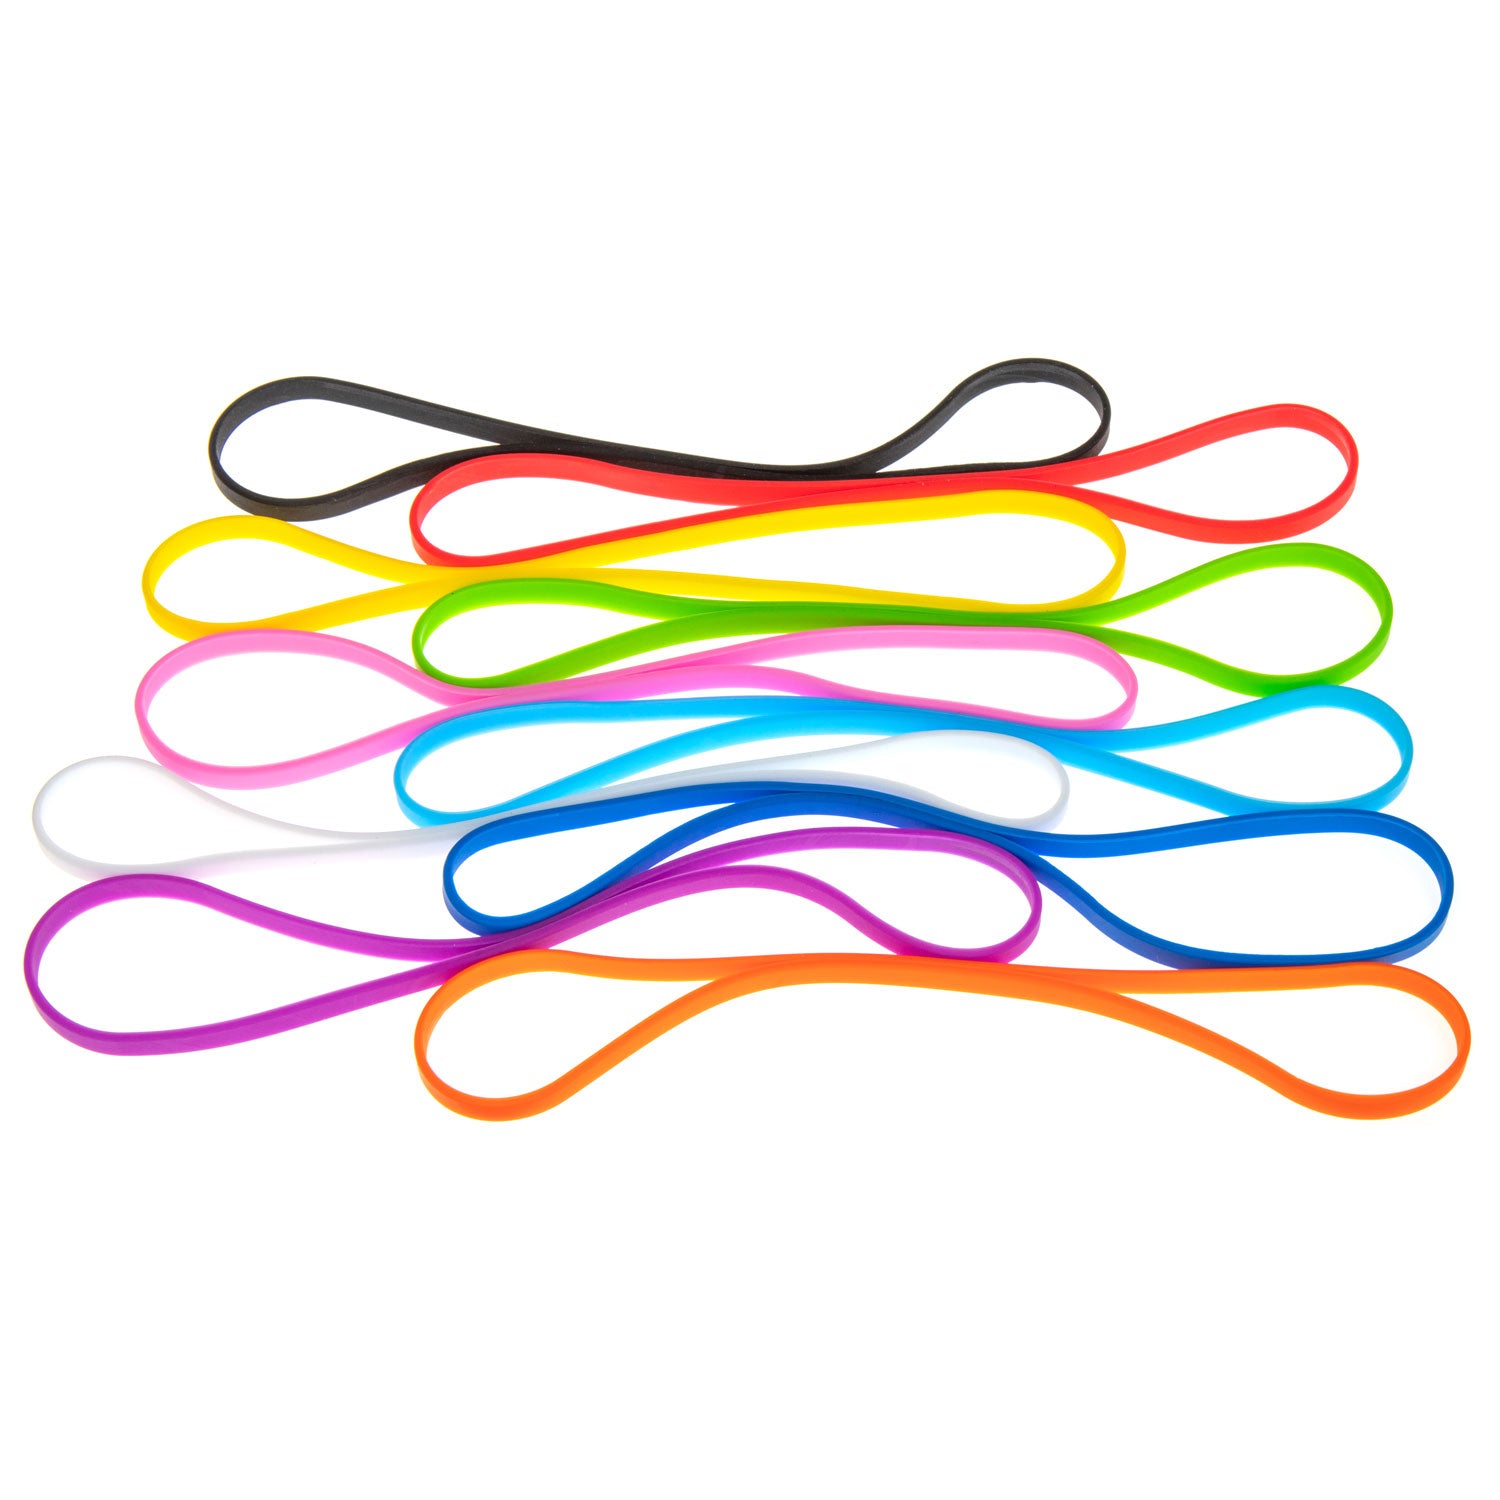 Grifiti Band Joes 9 x 0.25 Silicone Rubber Bands Cooking Boxes Puzzles